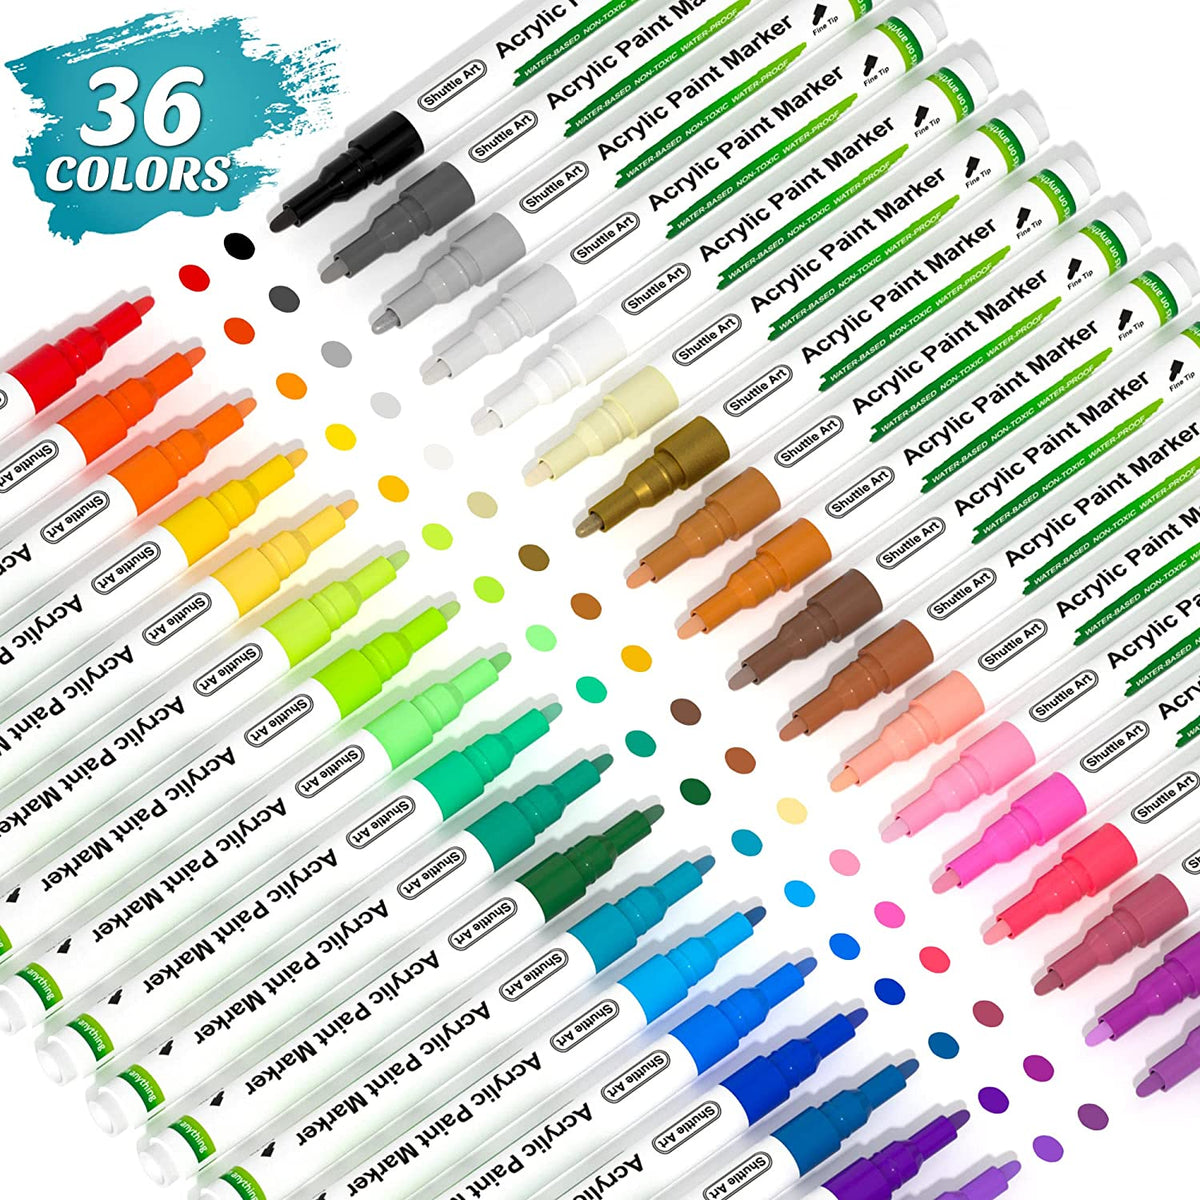  Shuttle Art 48 Colors Dual Tip Acrylic Paint Markers, Brush Tip  and Fine Tip Acrylic Paint Pens for Rock Painting, Ceramic, Wood, Canvas,  Plastic, Glass, Stone, Calligraphy, Card Making, DIY Crafts 